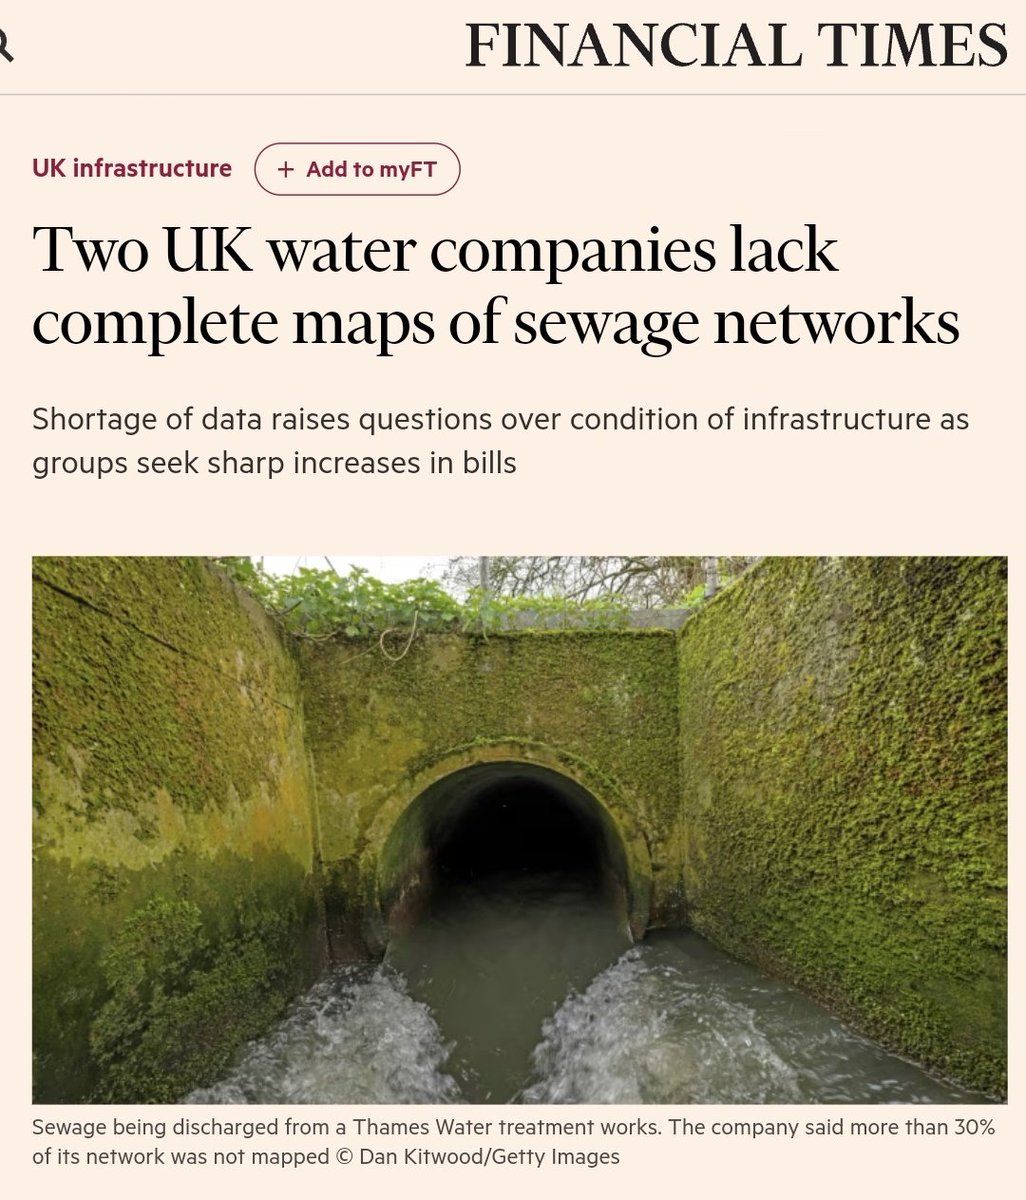 Thames Water, 16m customers, said more than 30% of its network was not mapped. Southern Water, with 4.7m customers, 40%.
This is madness. How are they to fix the network, which WE will pay for with even higher bills??
#TorySewageParty #ToriesOut657